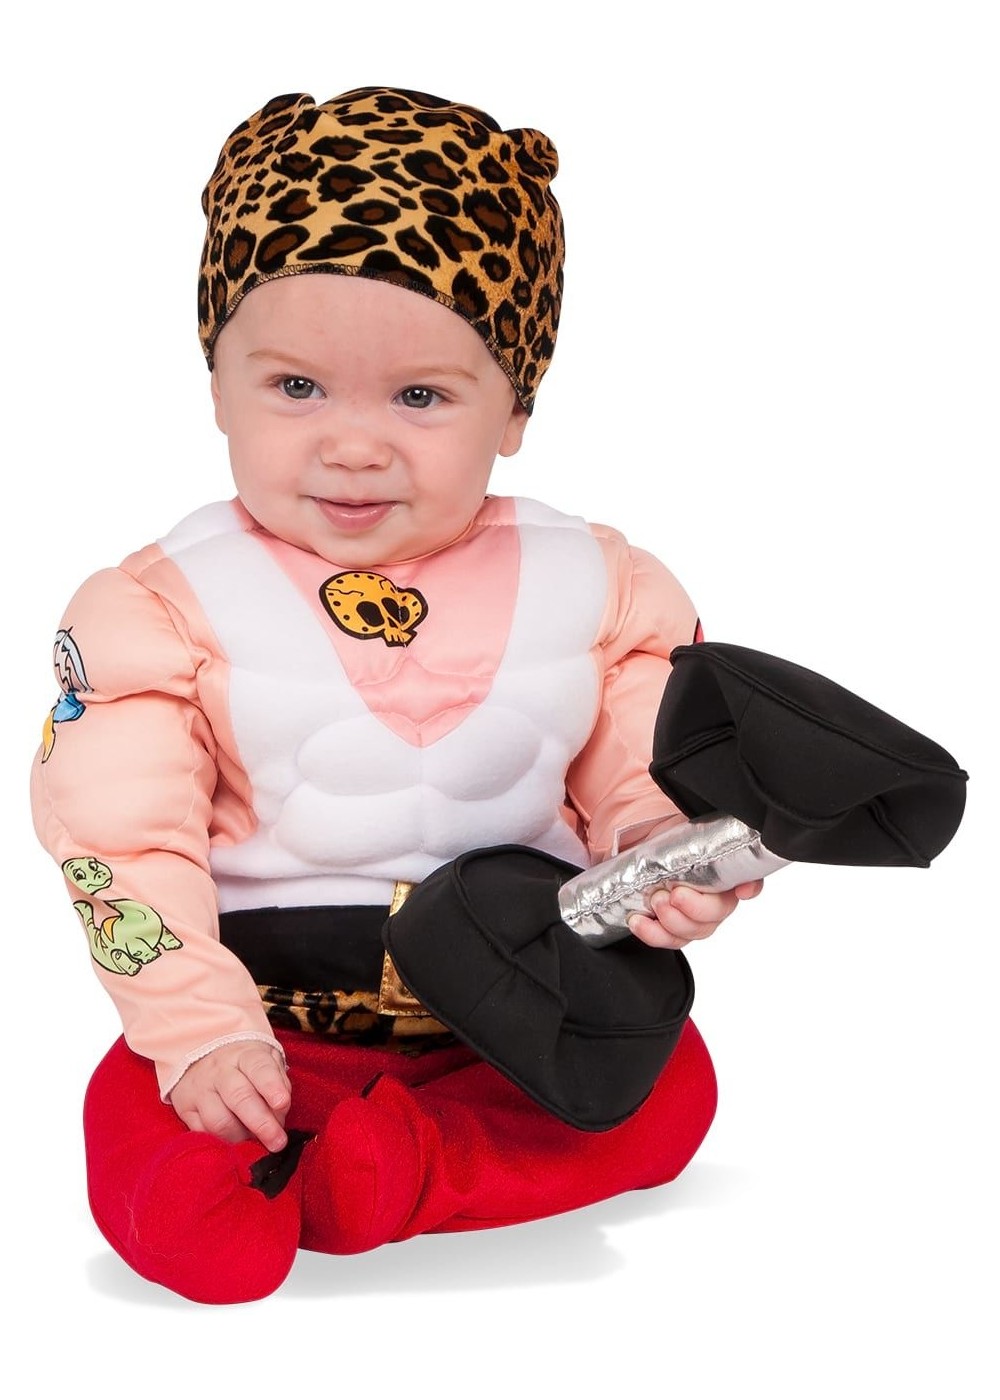 Mr. Muscleman Infant Costume